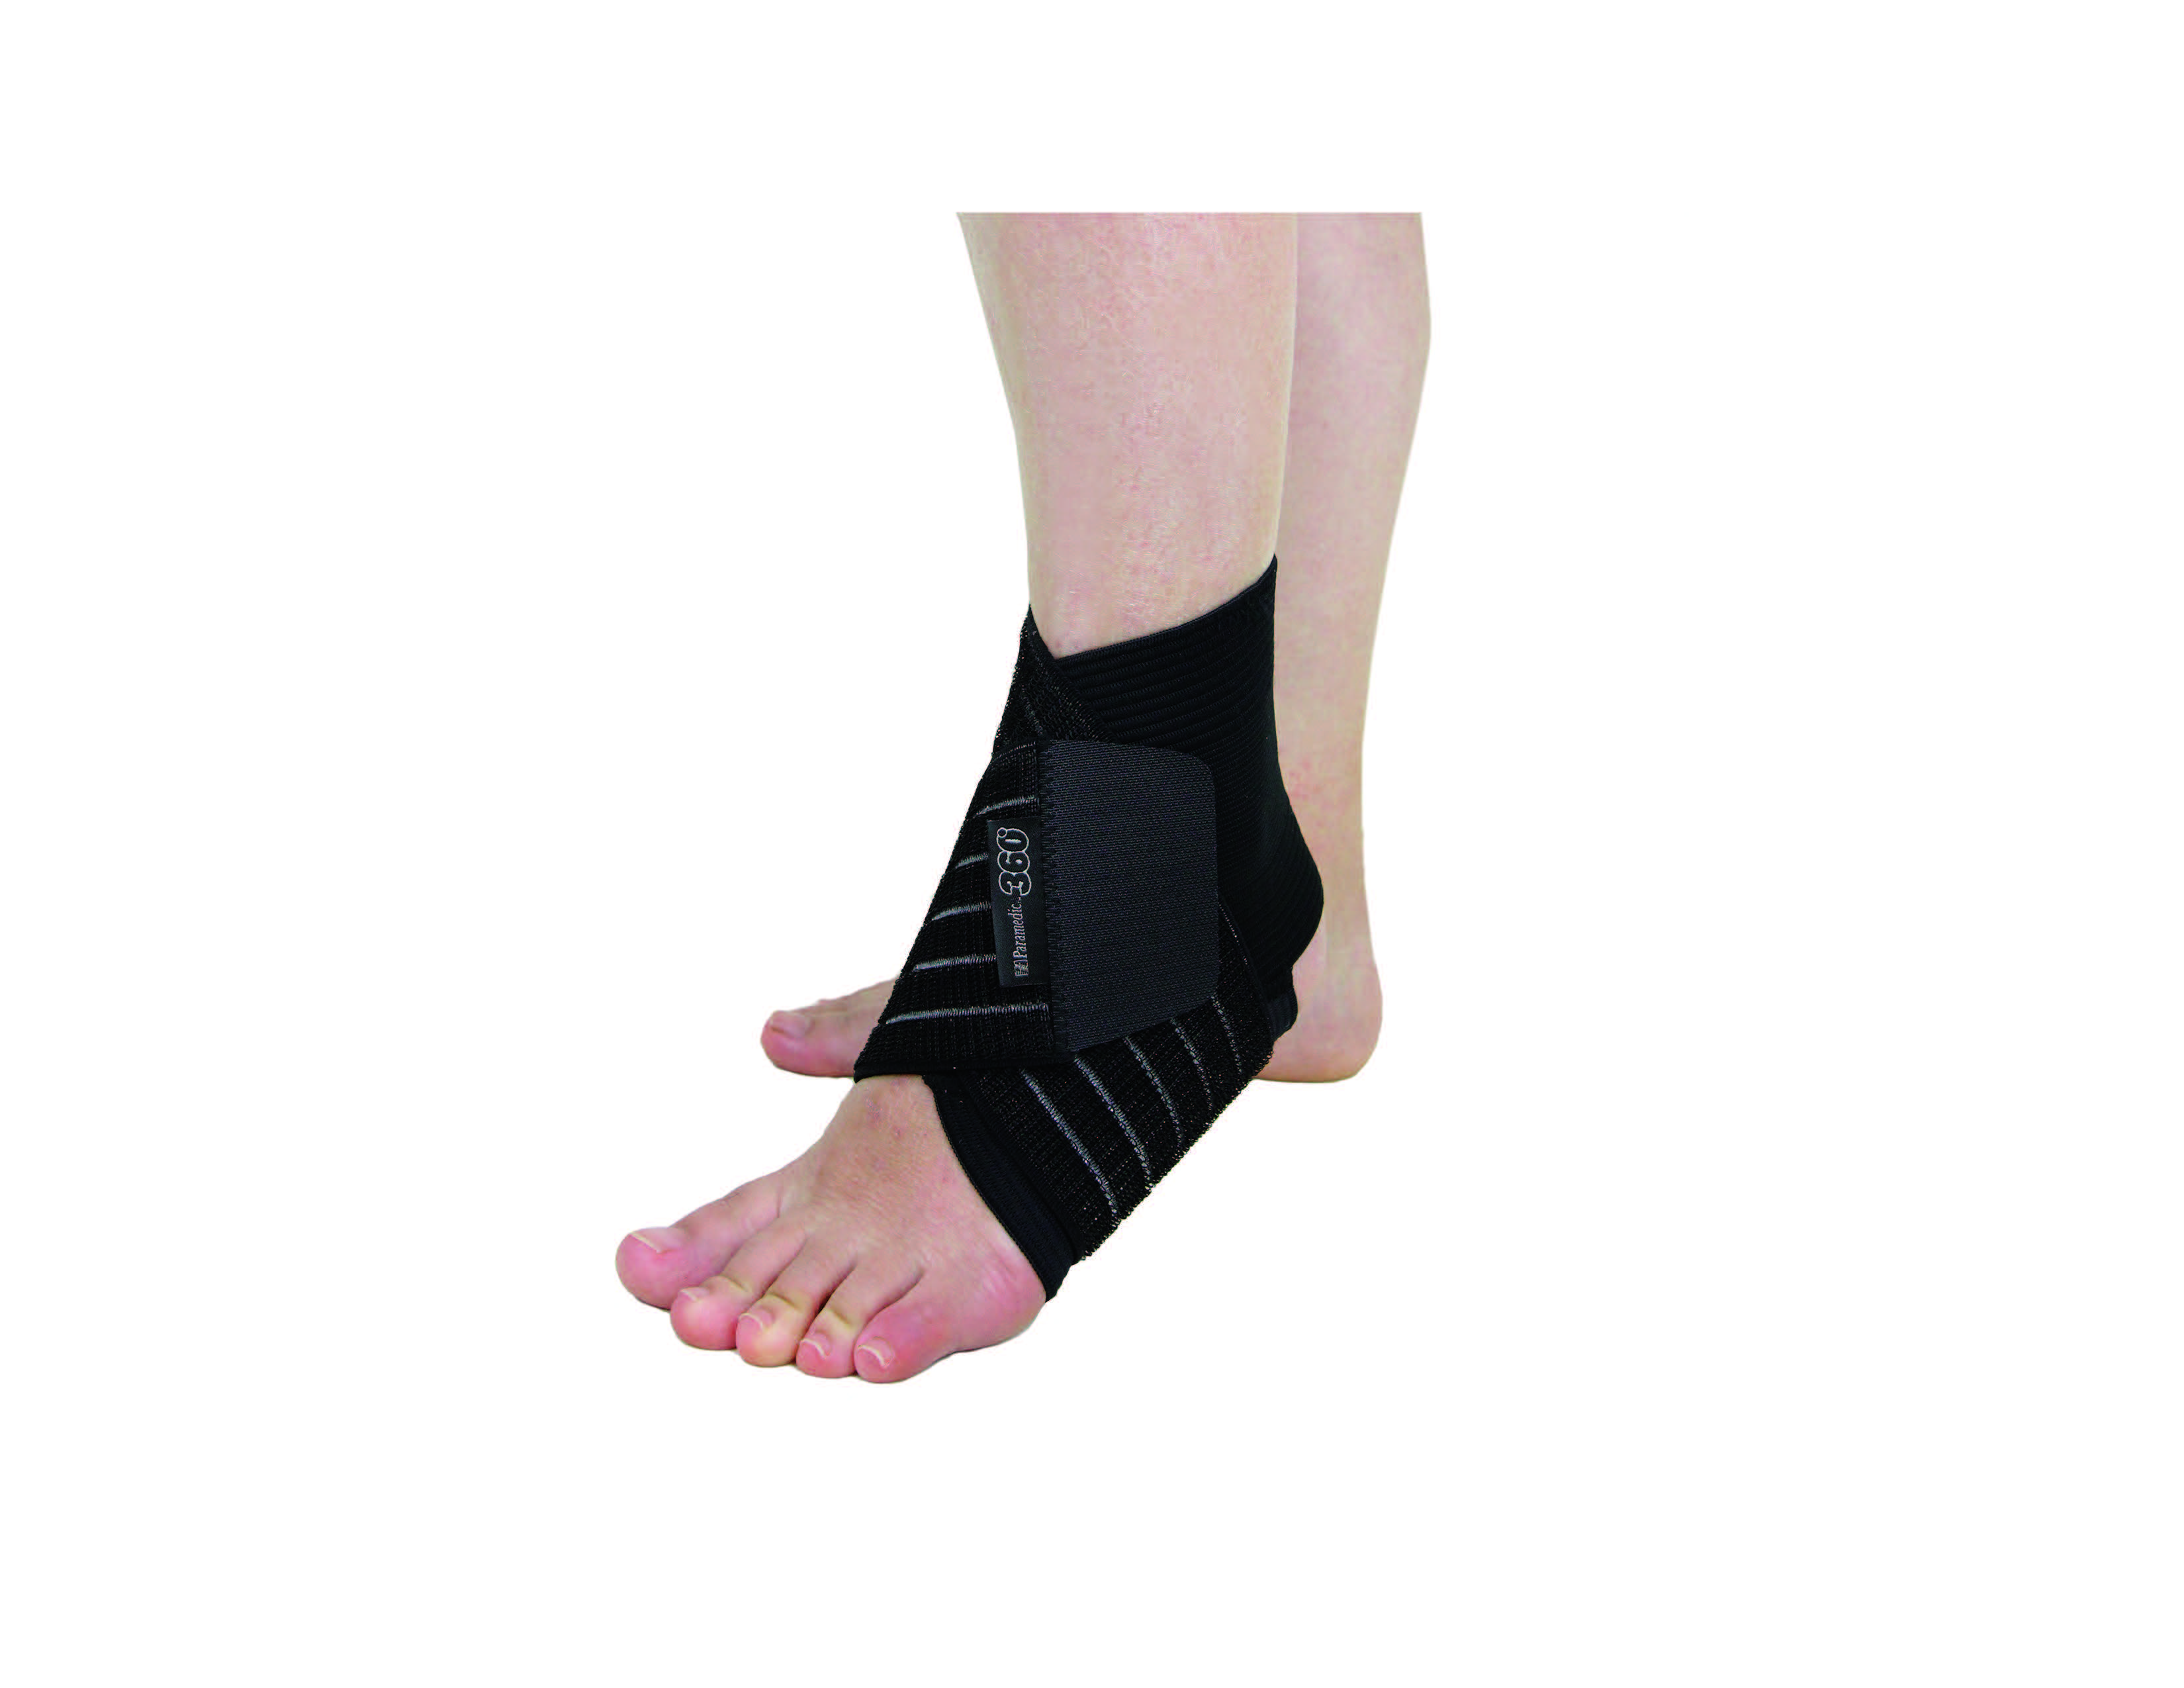 Life Brand Elastic Ankle Support, Small-Medium, 1 Pack - 1 ea